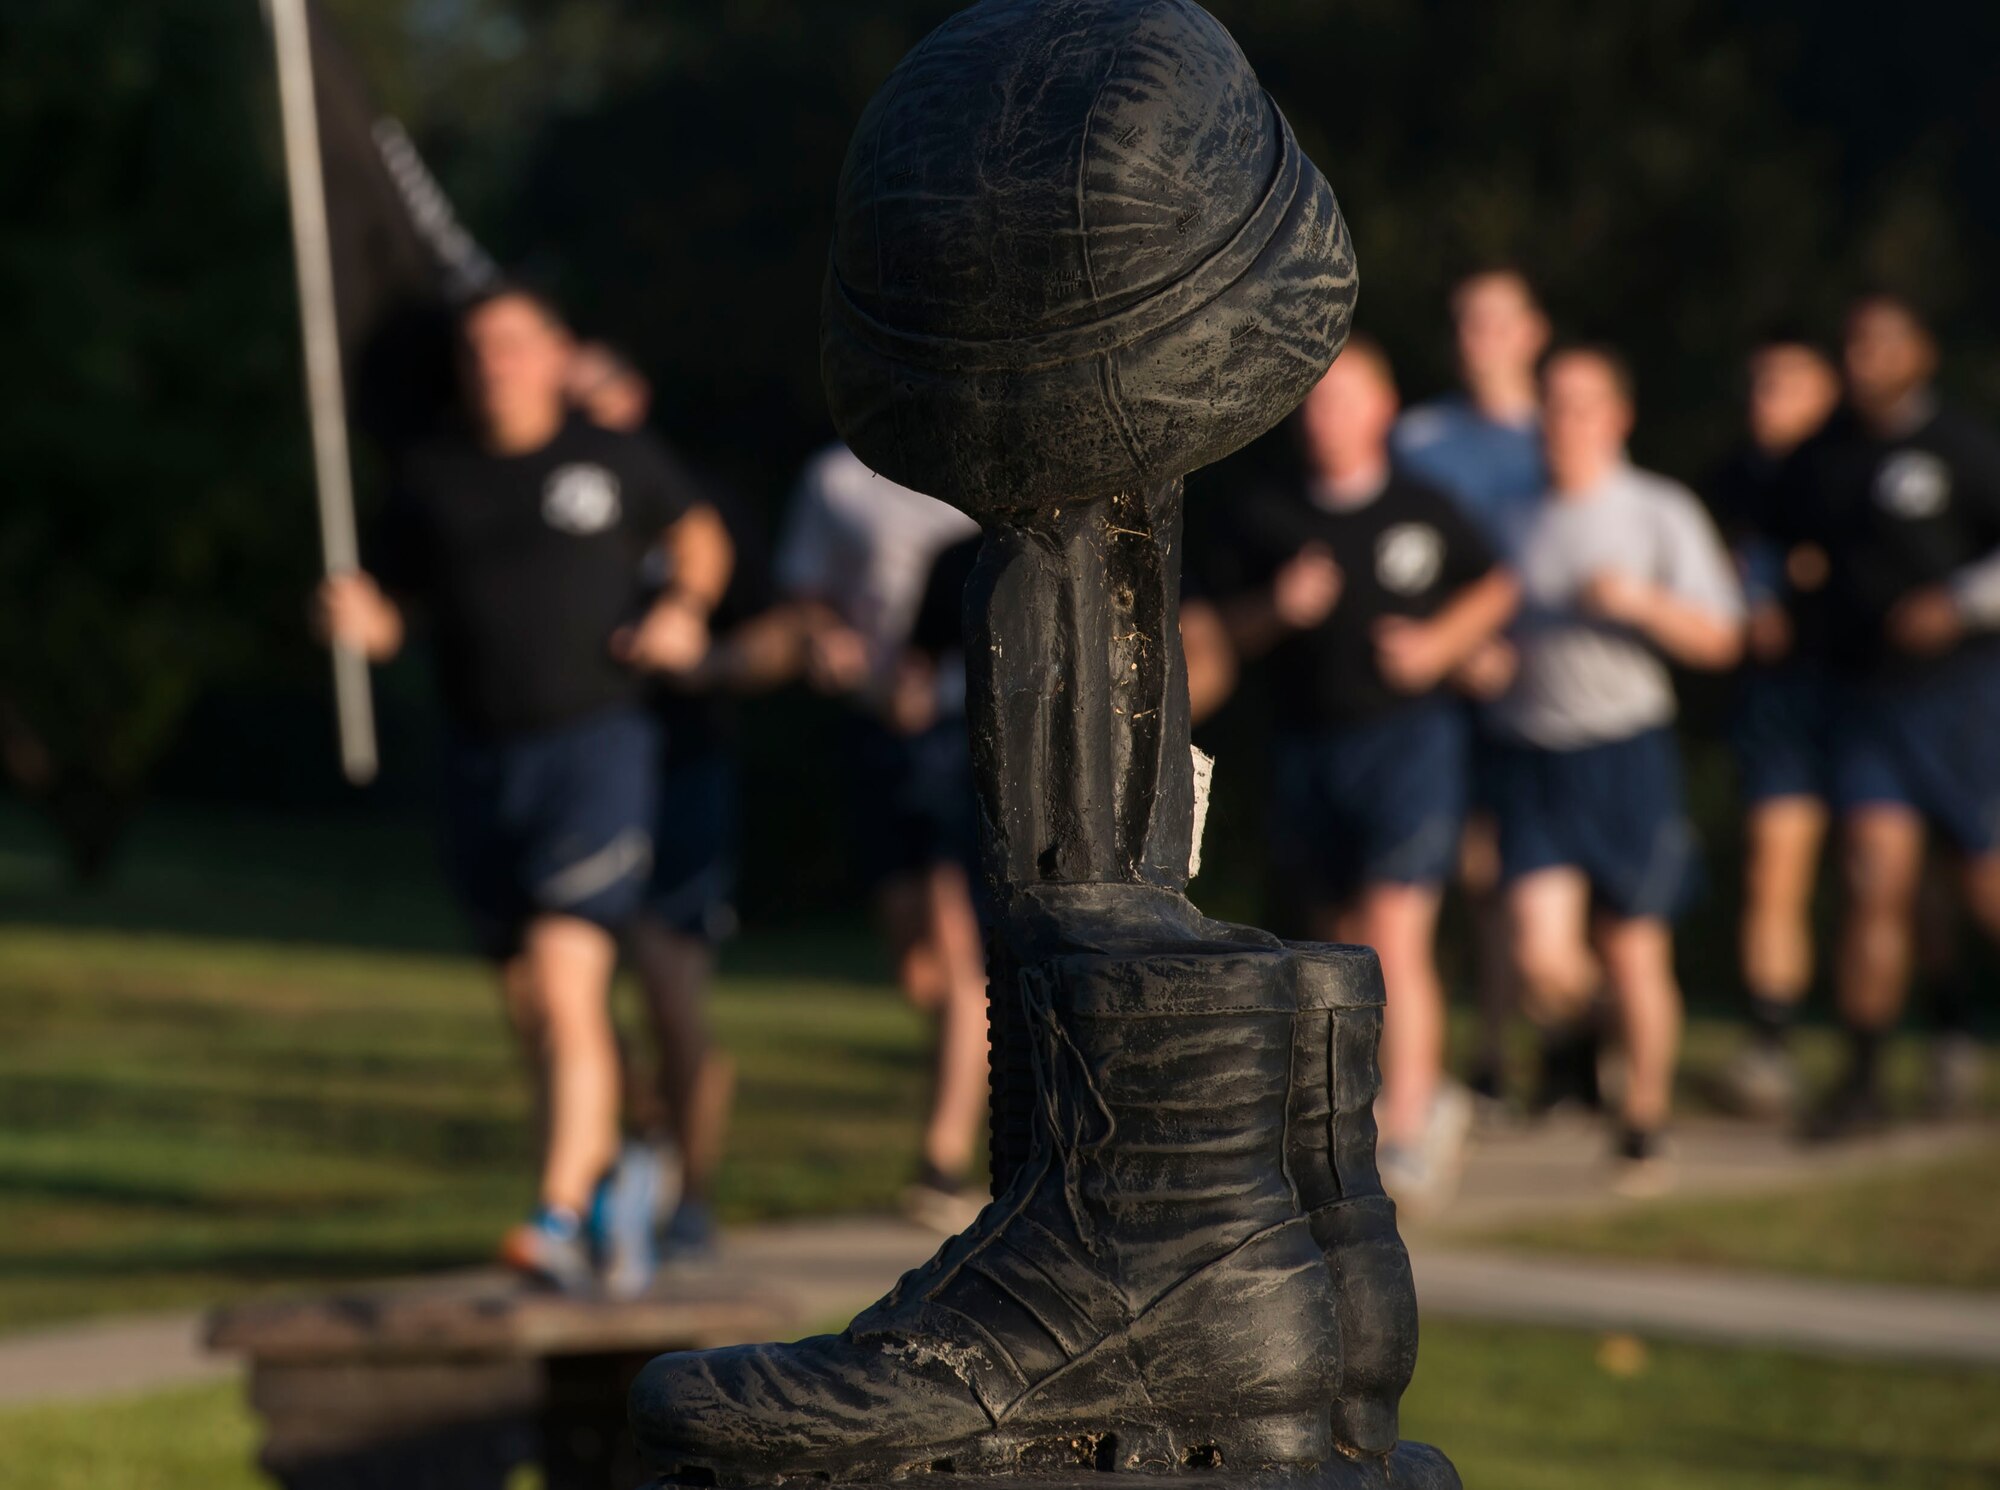 U.S. Airmen assigned to the 20th Fighter Wing participate in a 24-hour POW/MIA run at Shaw Air Force Base, S.C., Sept. 20, 2018.